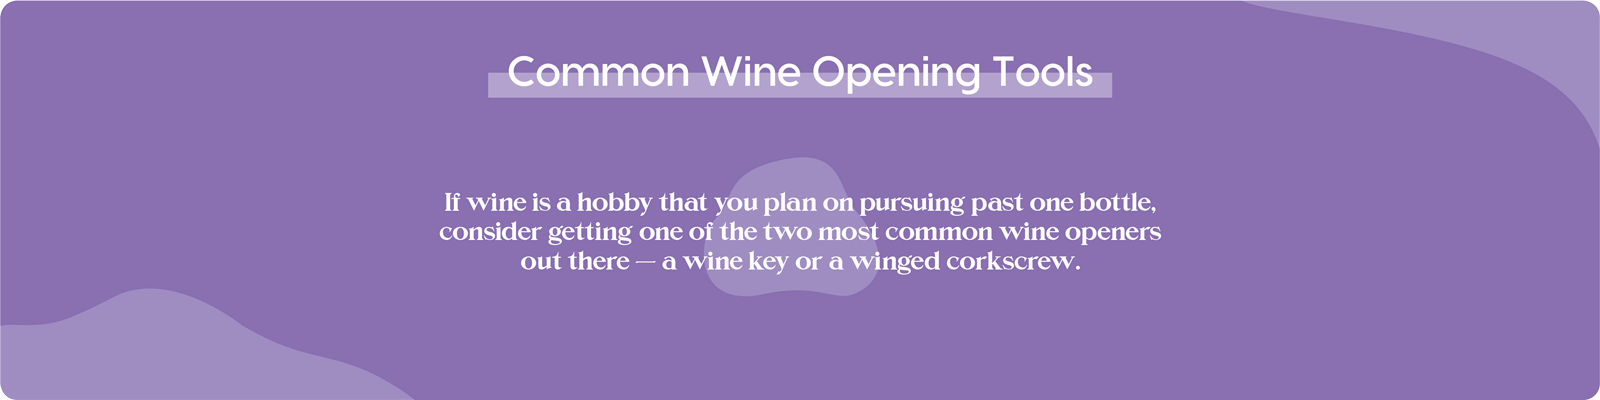 Purple Background Graphic with Overlaid Text that reads: Common Wine Opening Tools - If wine is a hobby that you plan on pursuing past one bottle, consider getting one of the two most common wine openers out there - a wine key or a winged corkscrew.